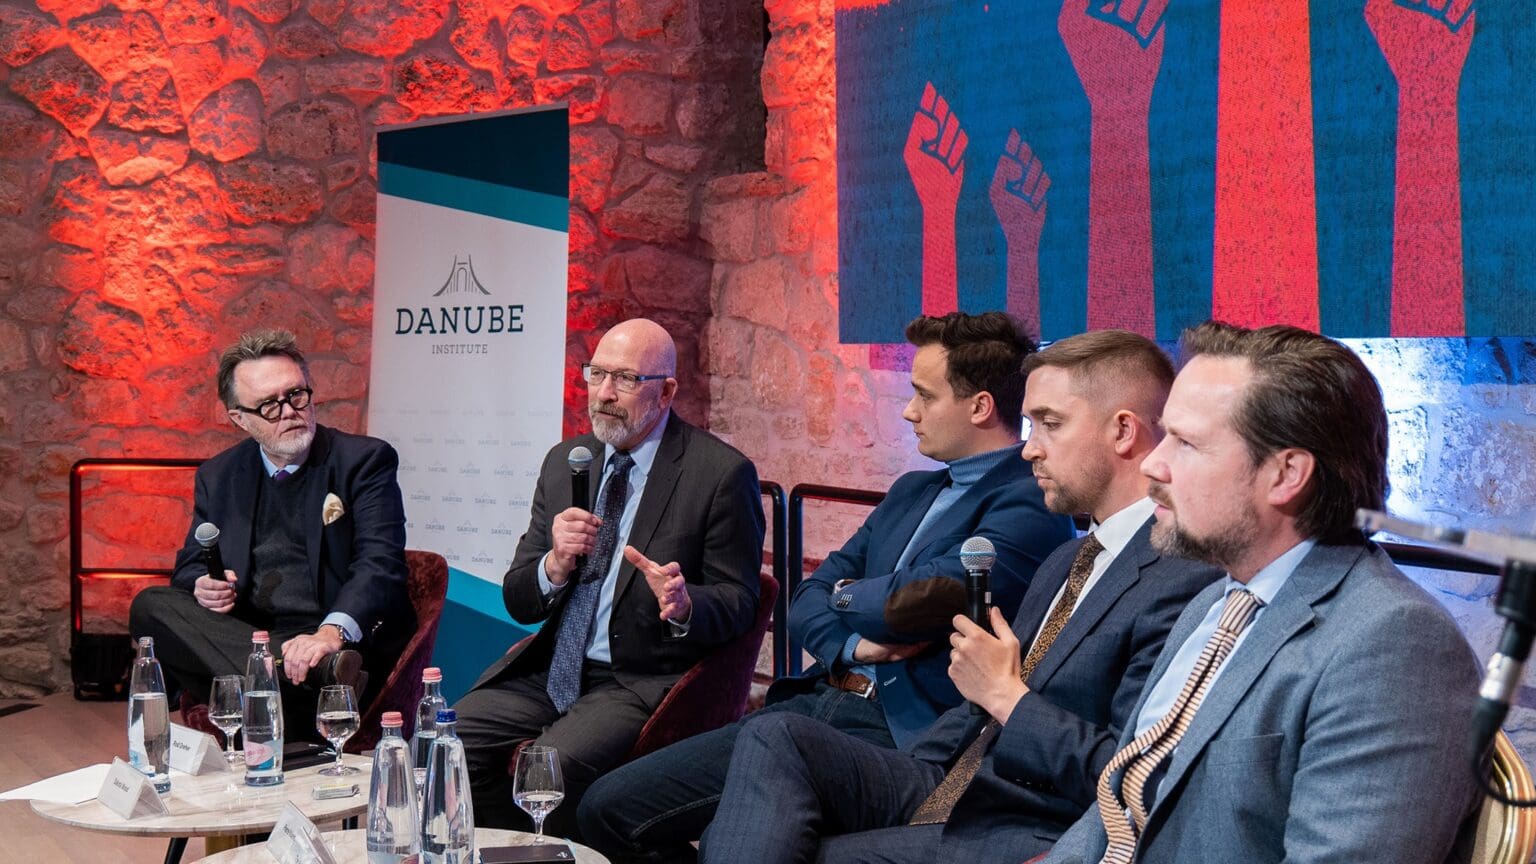 Illustrious Speakers Tackle Critical Race Theory, Wokeism at Danube Institute Event